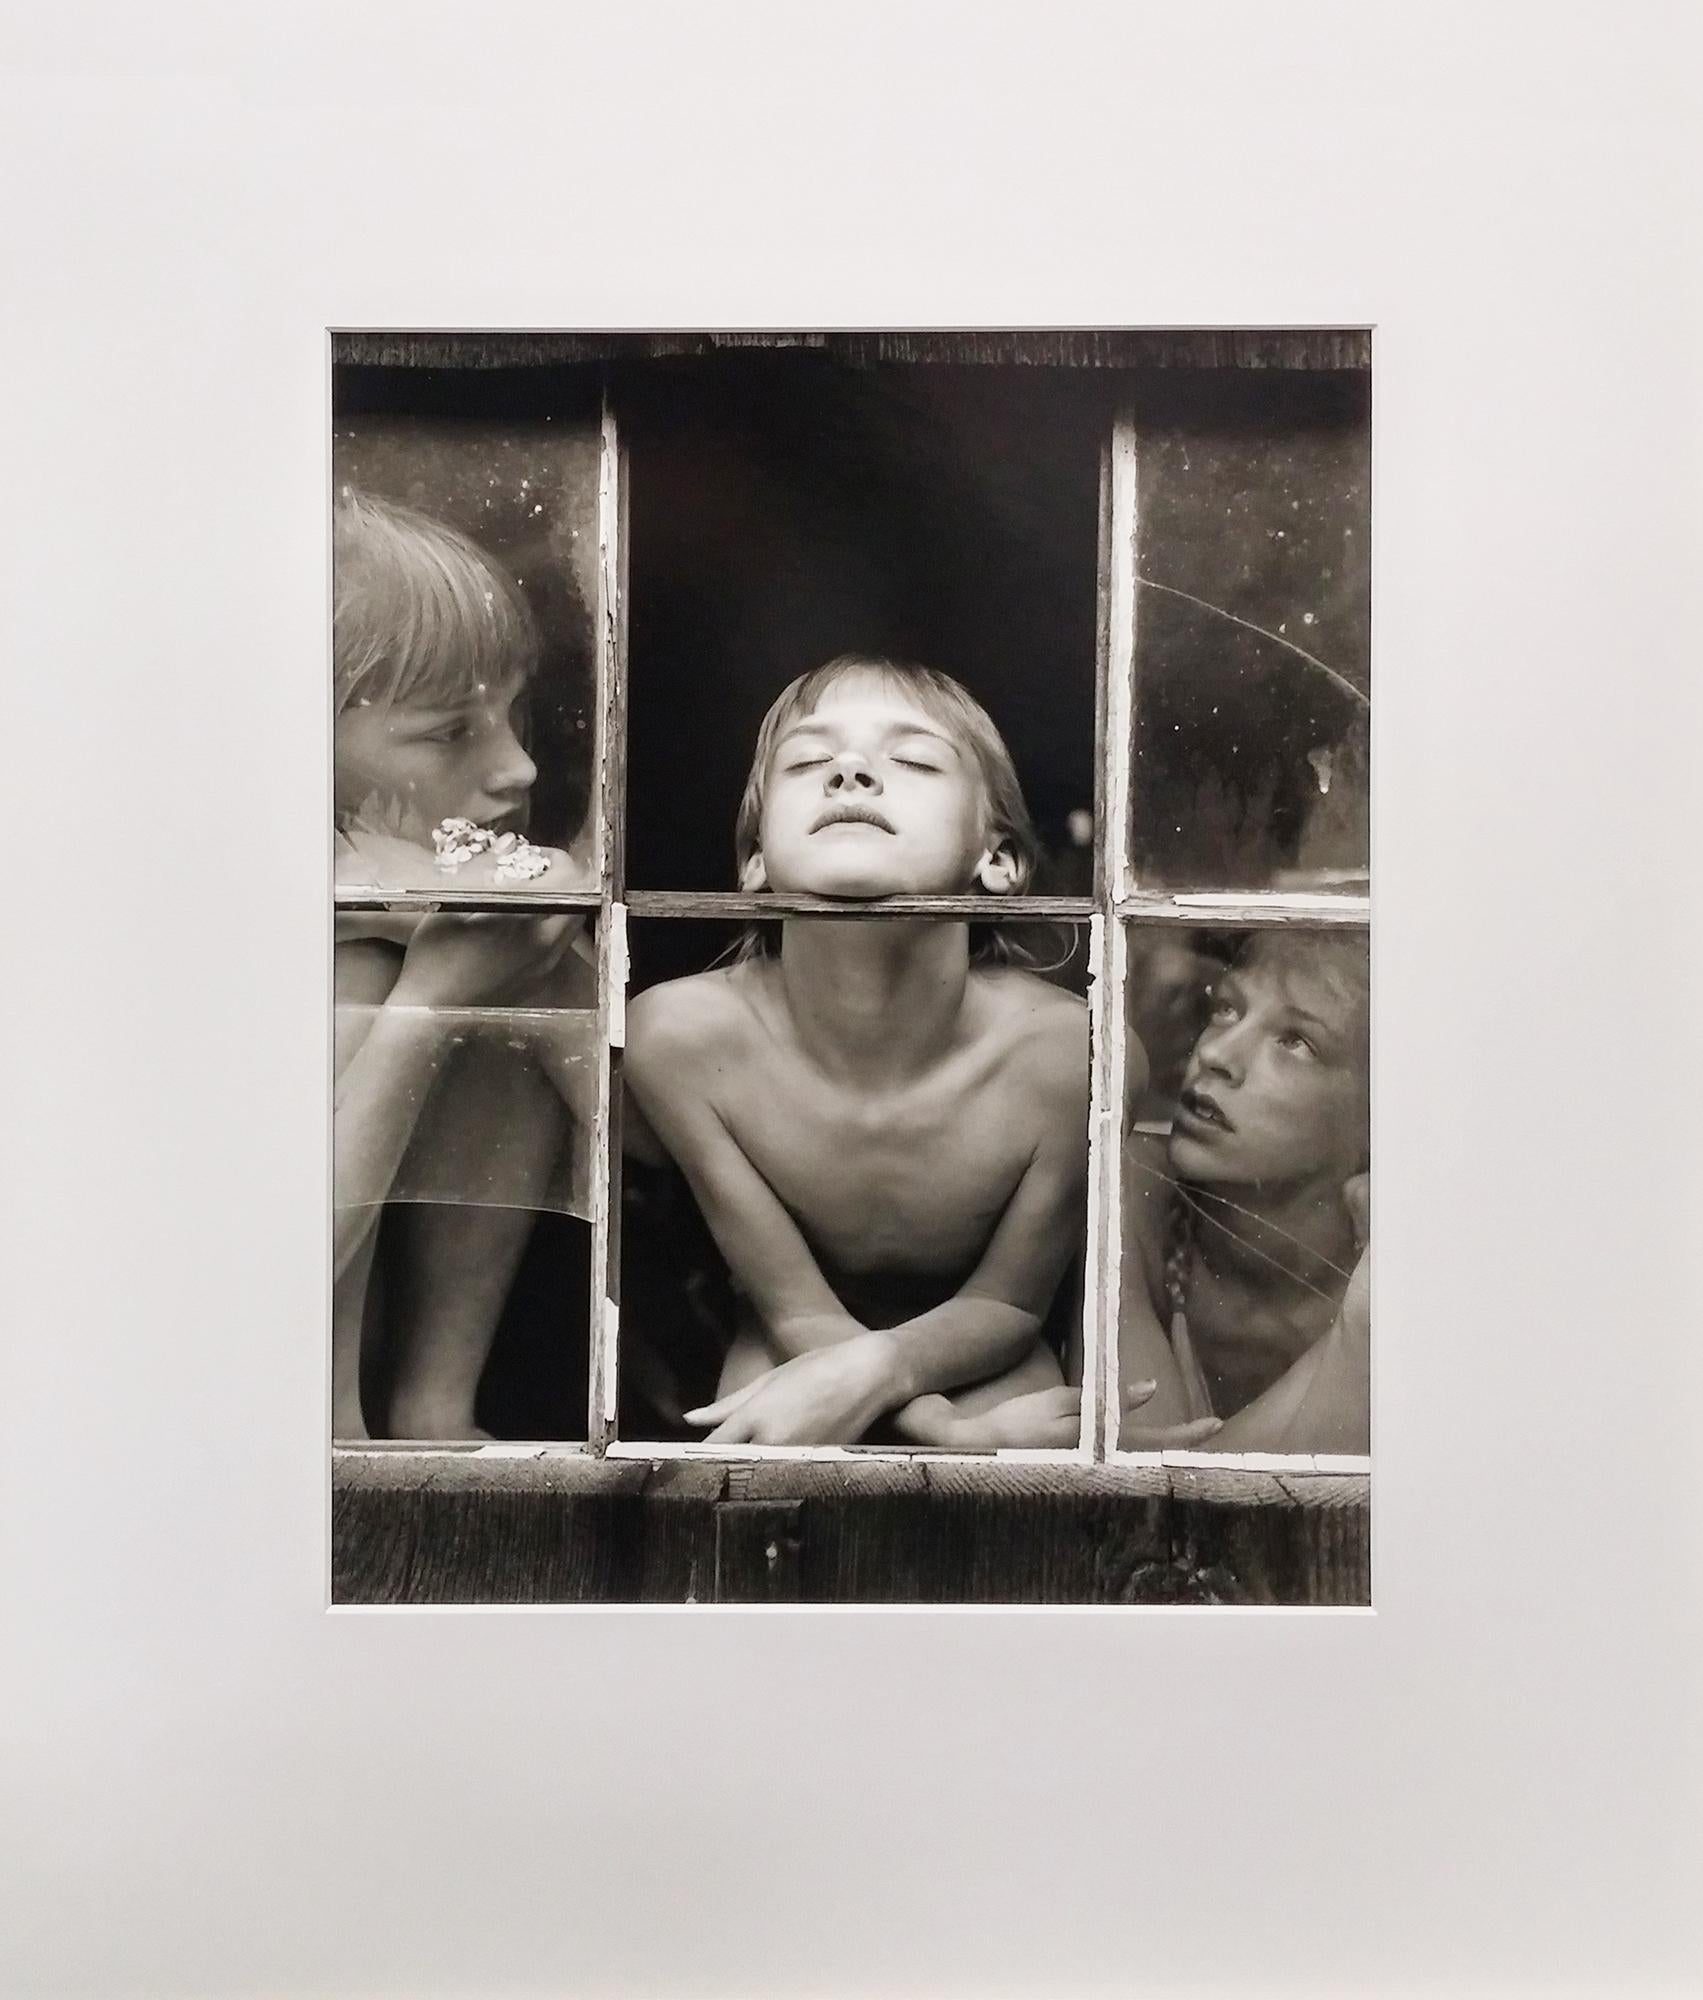 Published by Aperture in 1992, this portfolio includes three gelatin-silver prints and a cover page all in a cloth-covered clamshell case. Each of the 3 prints are hand signed, dated, titled and numbered on verso. The prints are 1. Christina, Misty